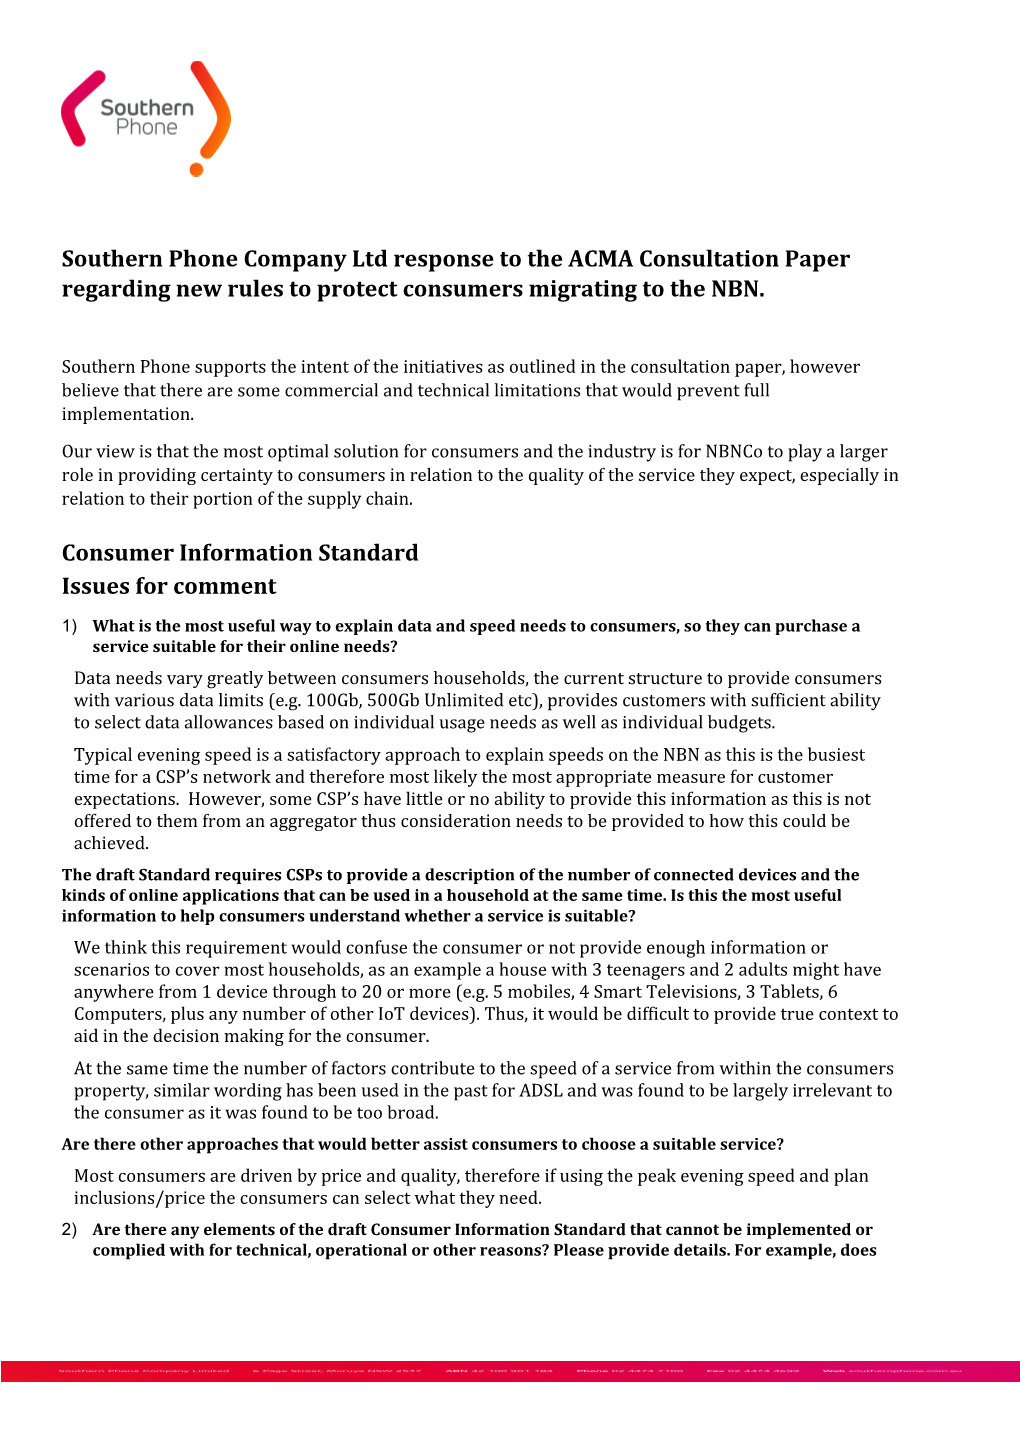 Southern Phone Company Ltd Response to the ACMA Consultation Paper Regarding New Rules